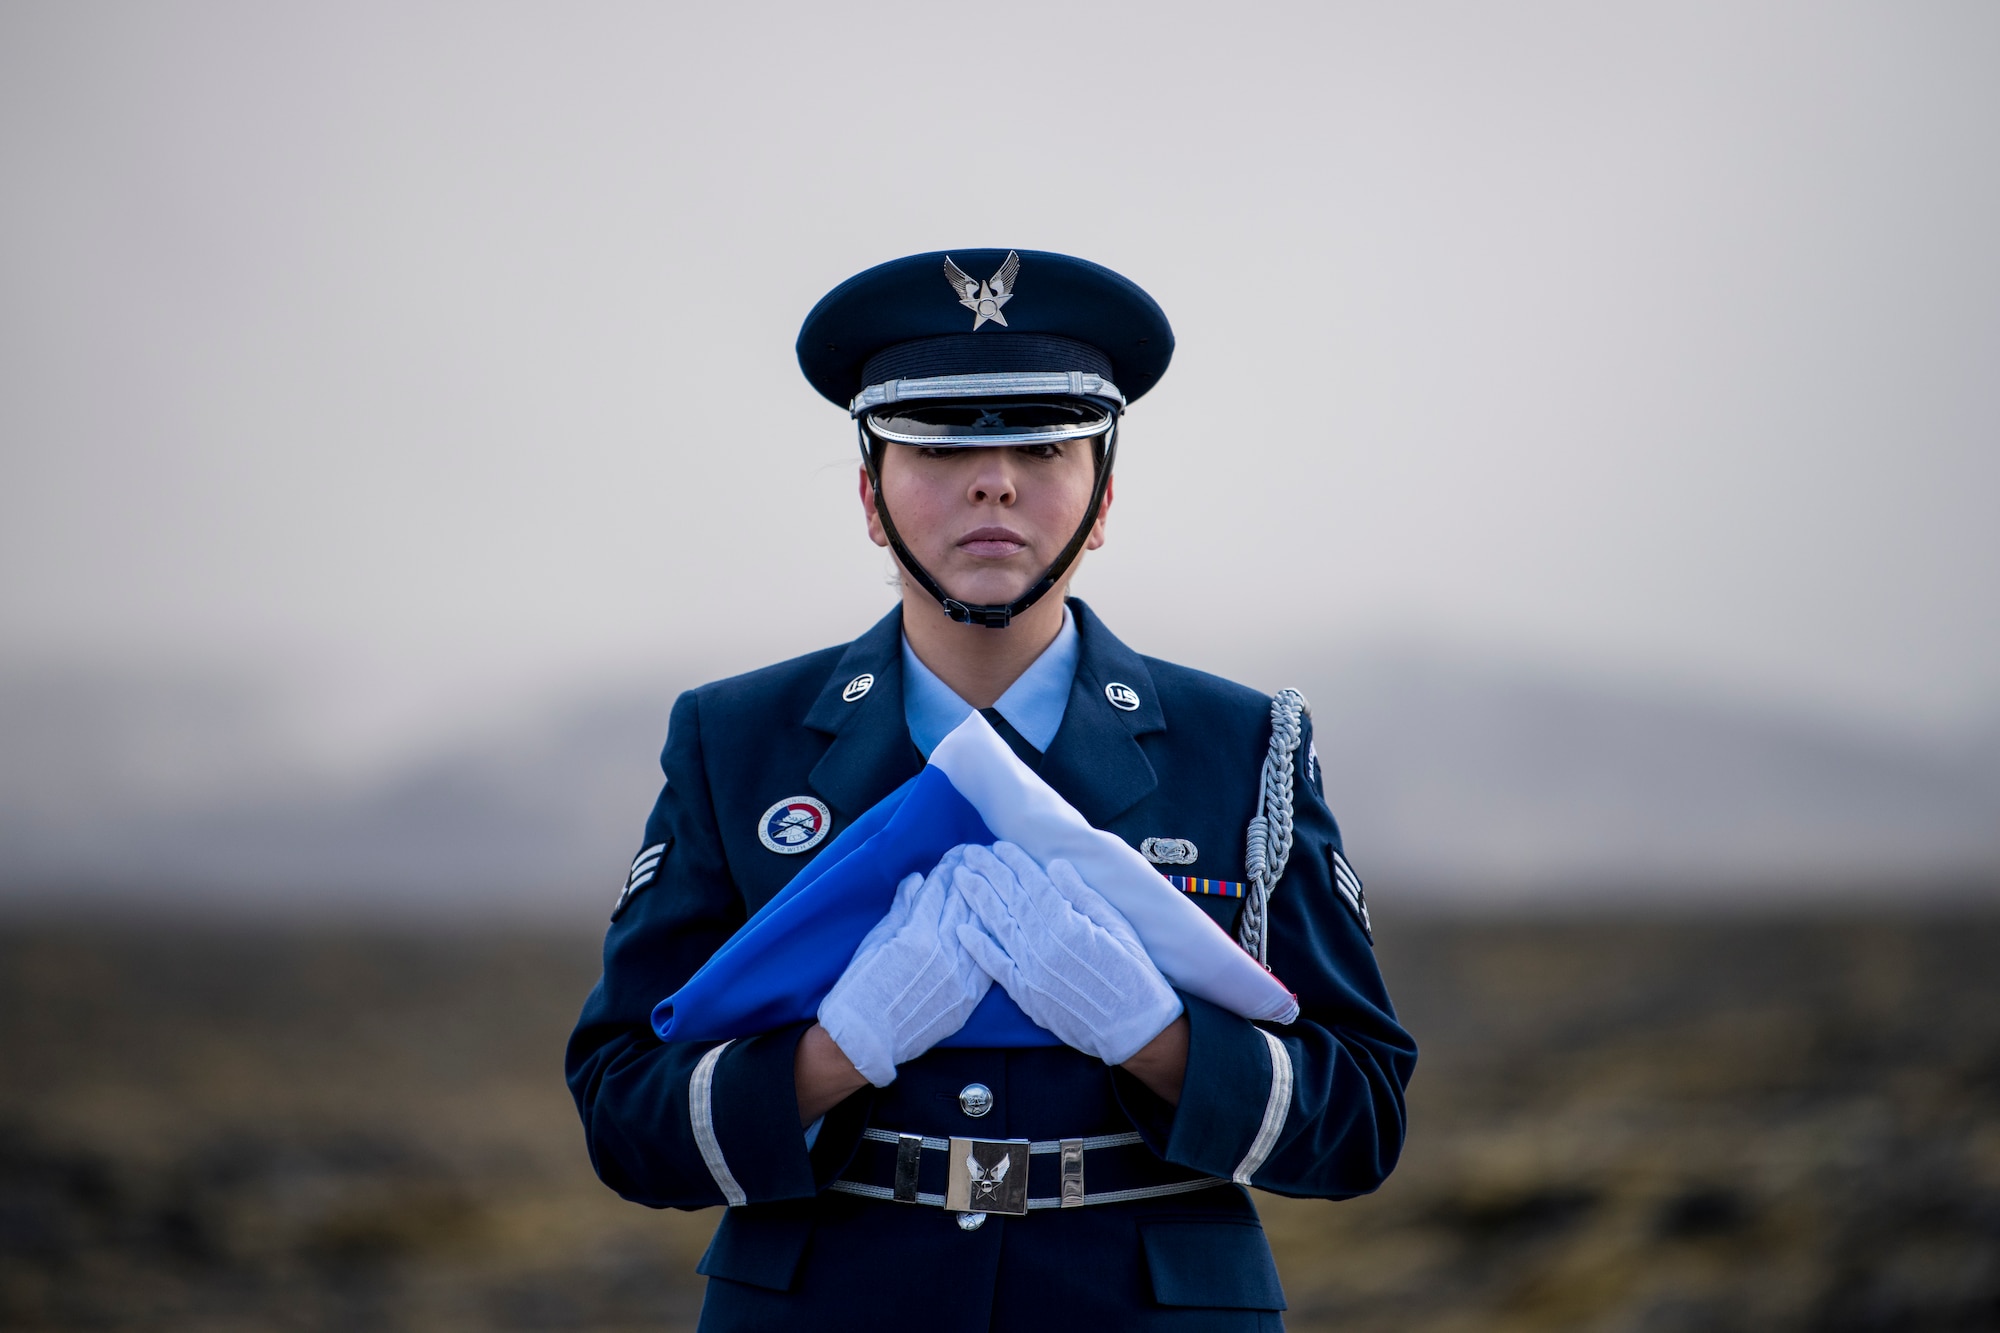 An Airmen assigned to the Spangdahlem Air Base Honor Guard prepares to raise the Iceland flag during the opening ceremony of a monument dedication, May 3, 2018 in Keflavic, Iceland. The ceremony recognized the 75th anniversary of the crash of a B-24 Liberator which resulted in the death of Lt. Gen. Frank Maxwell Andrews and 13 members of his crew. (U.S. Air Force photo/Tech. Sgt. Robert Cloys)